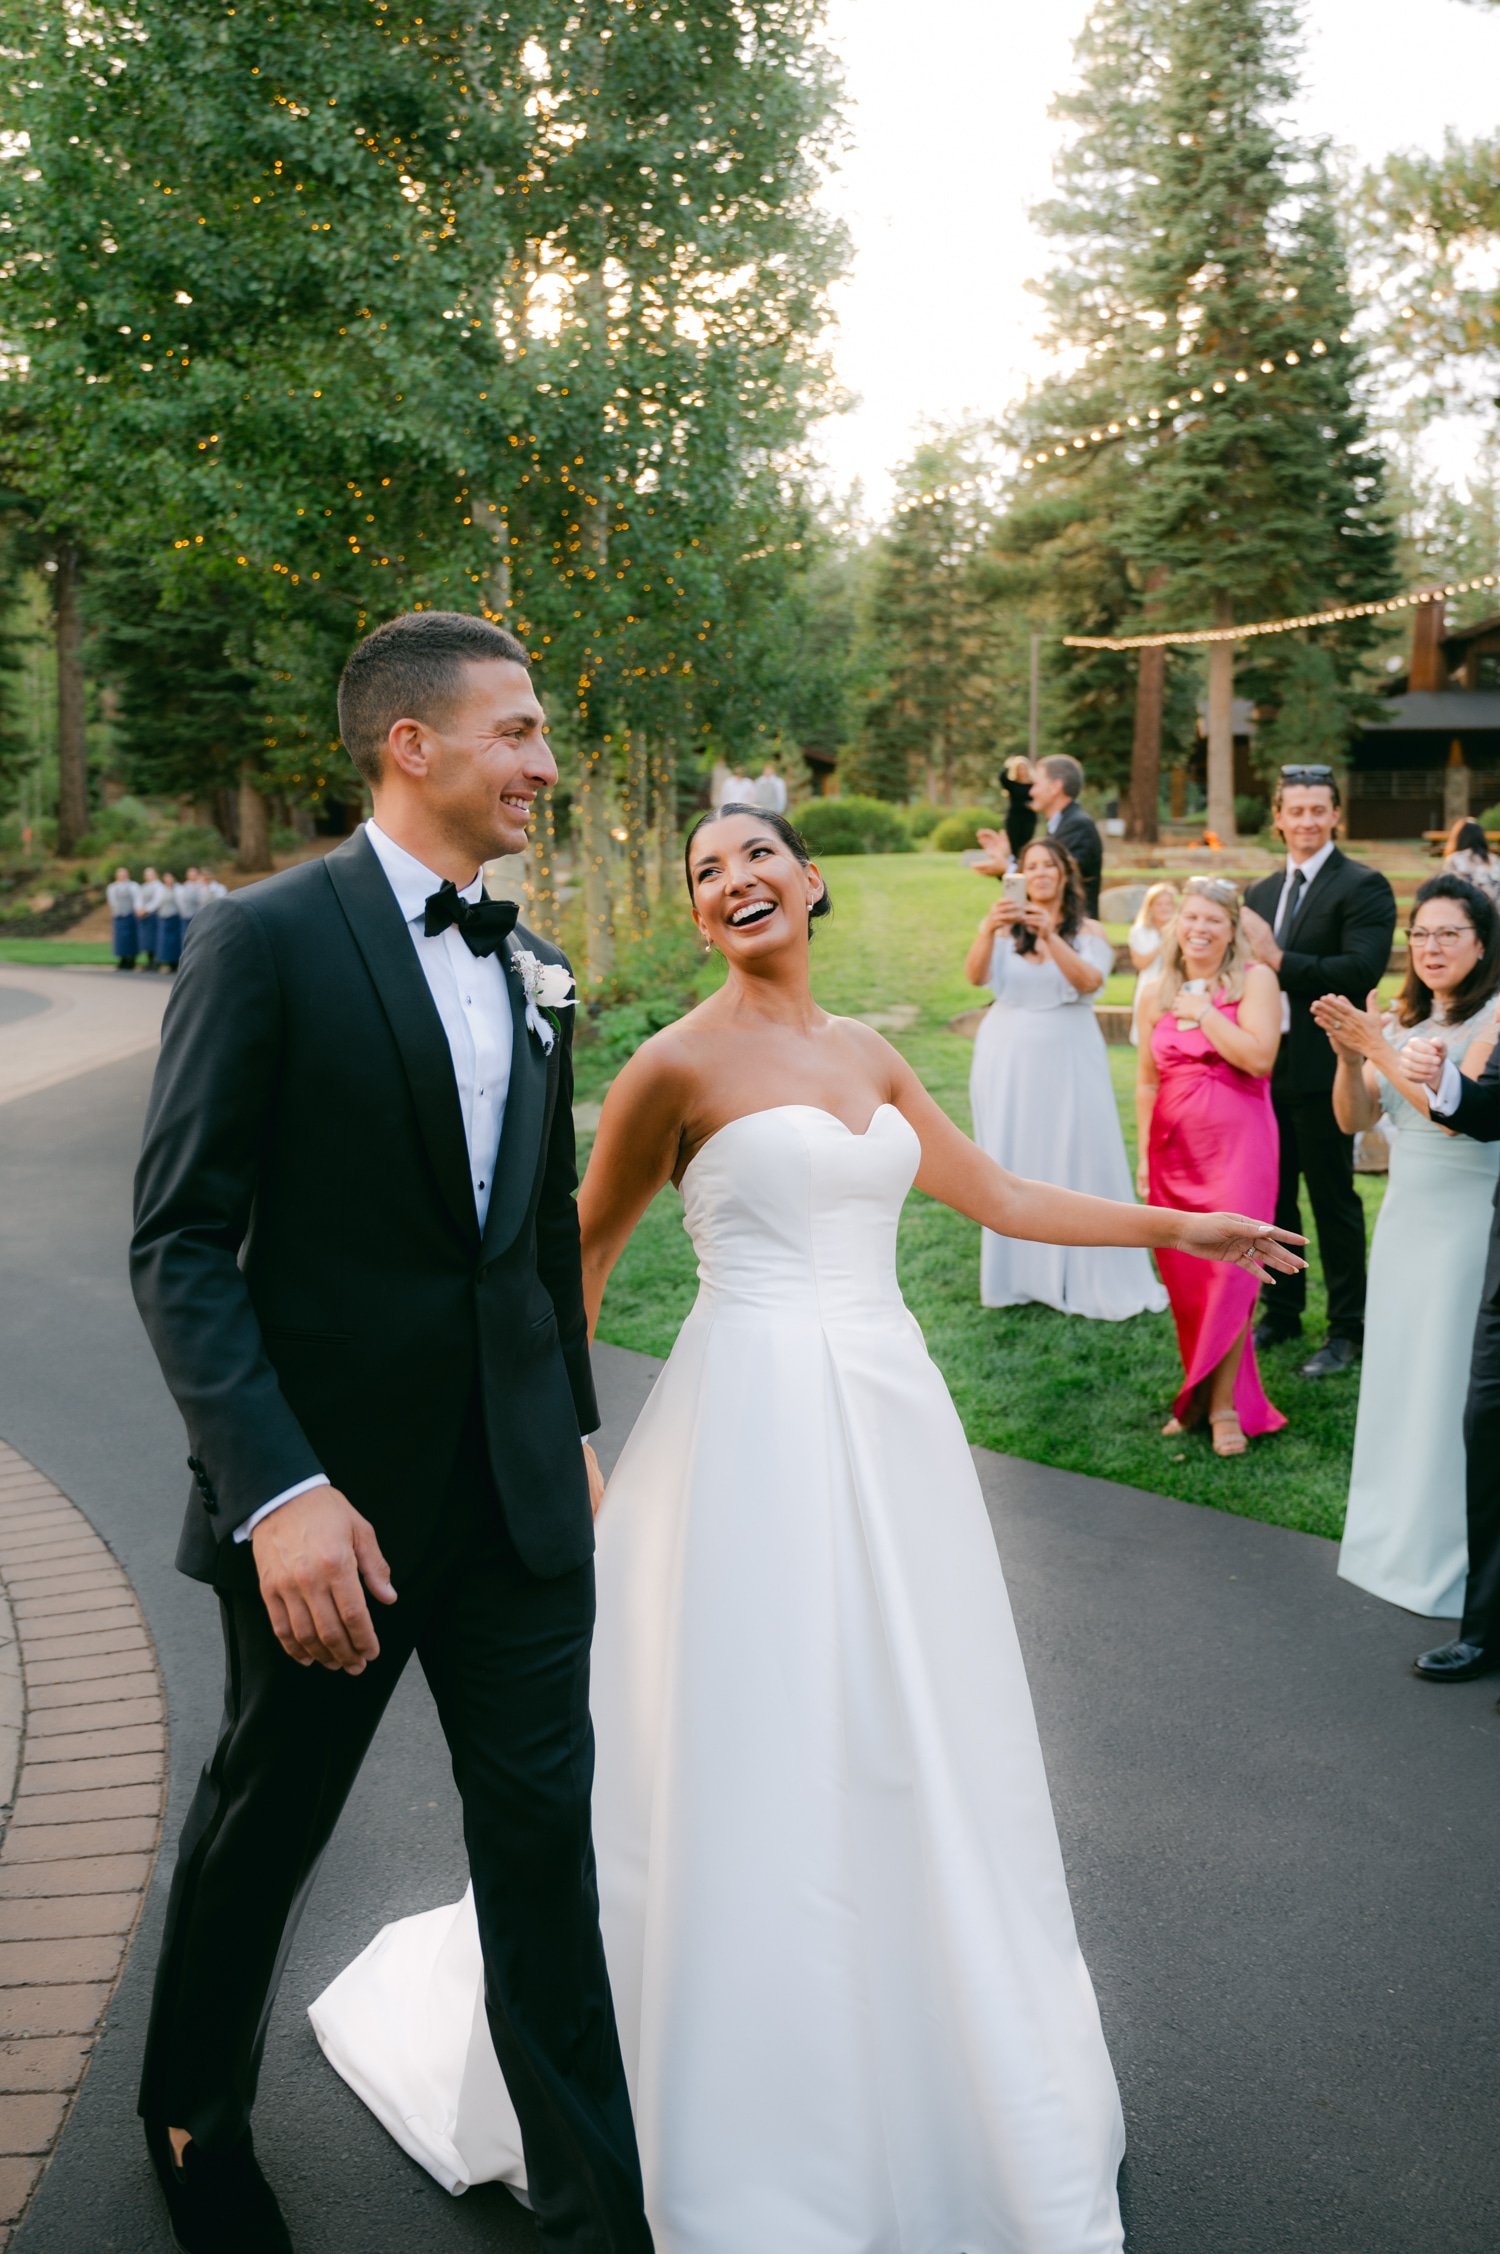 Martis Camp Wedding, photo of the newlywed couple happily walking to their reception